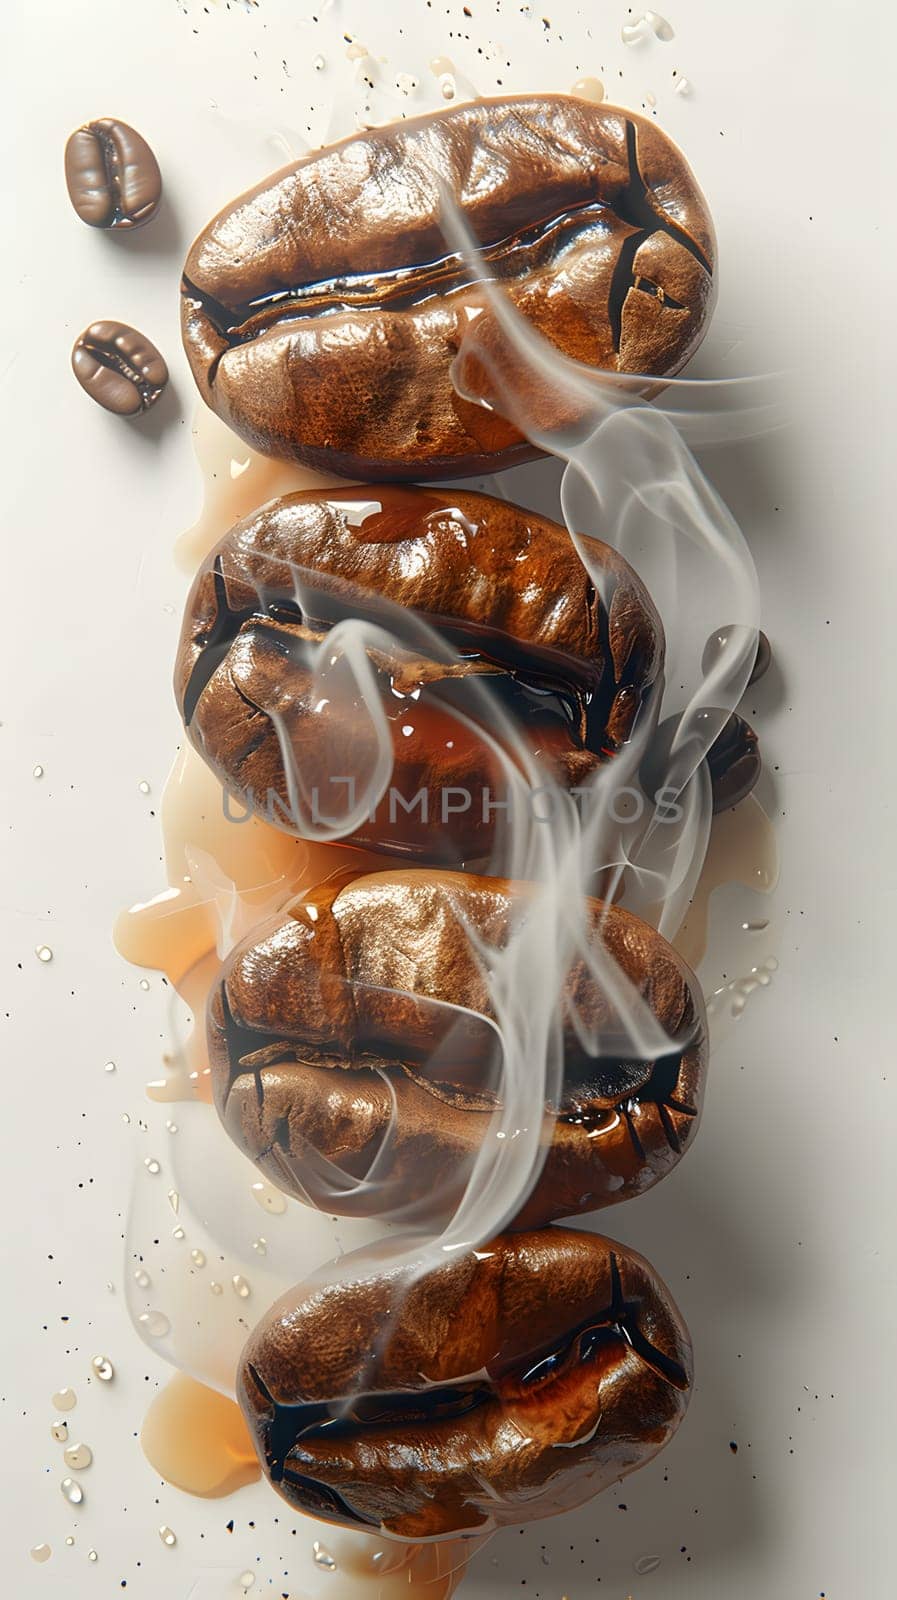 A pile of coffee beans emitting smoke, resembling a swarm of insects by Nadtochiy